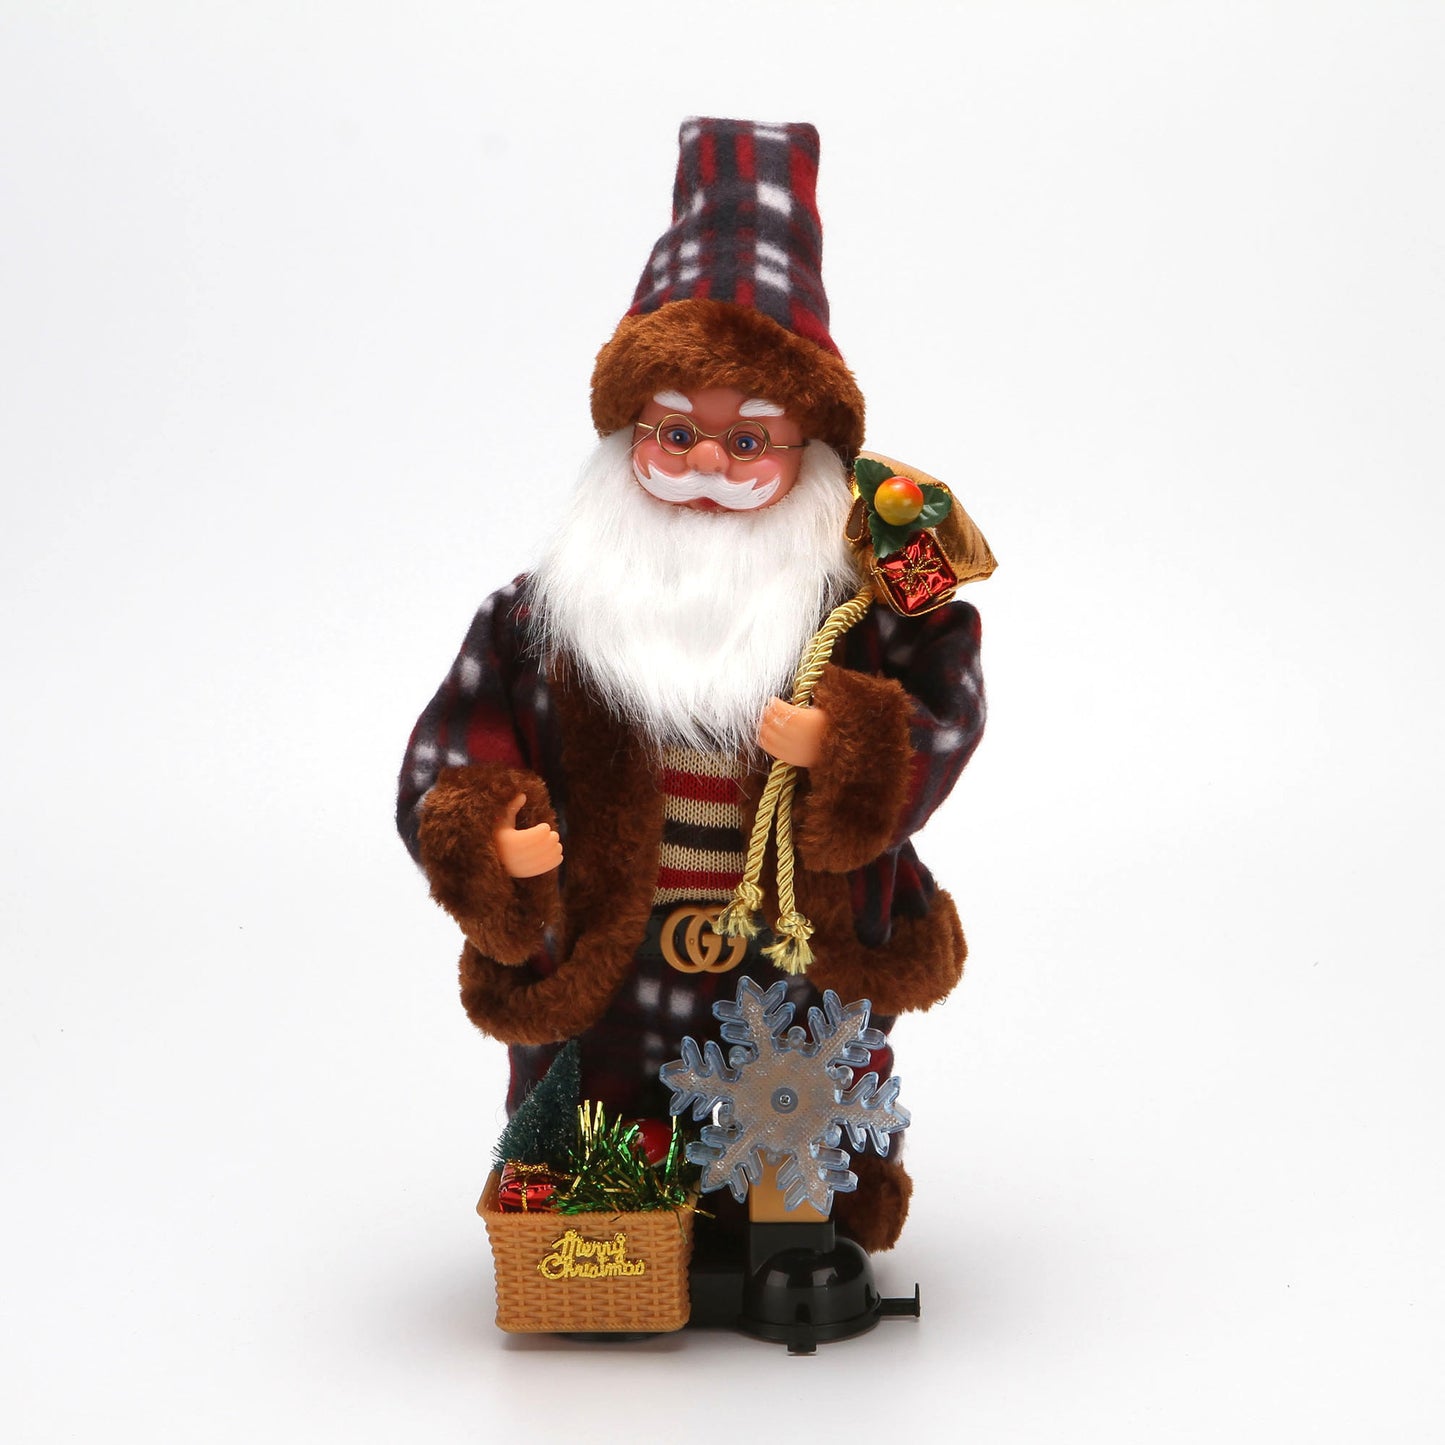 With creative electric Santa Claus toys children gifts